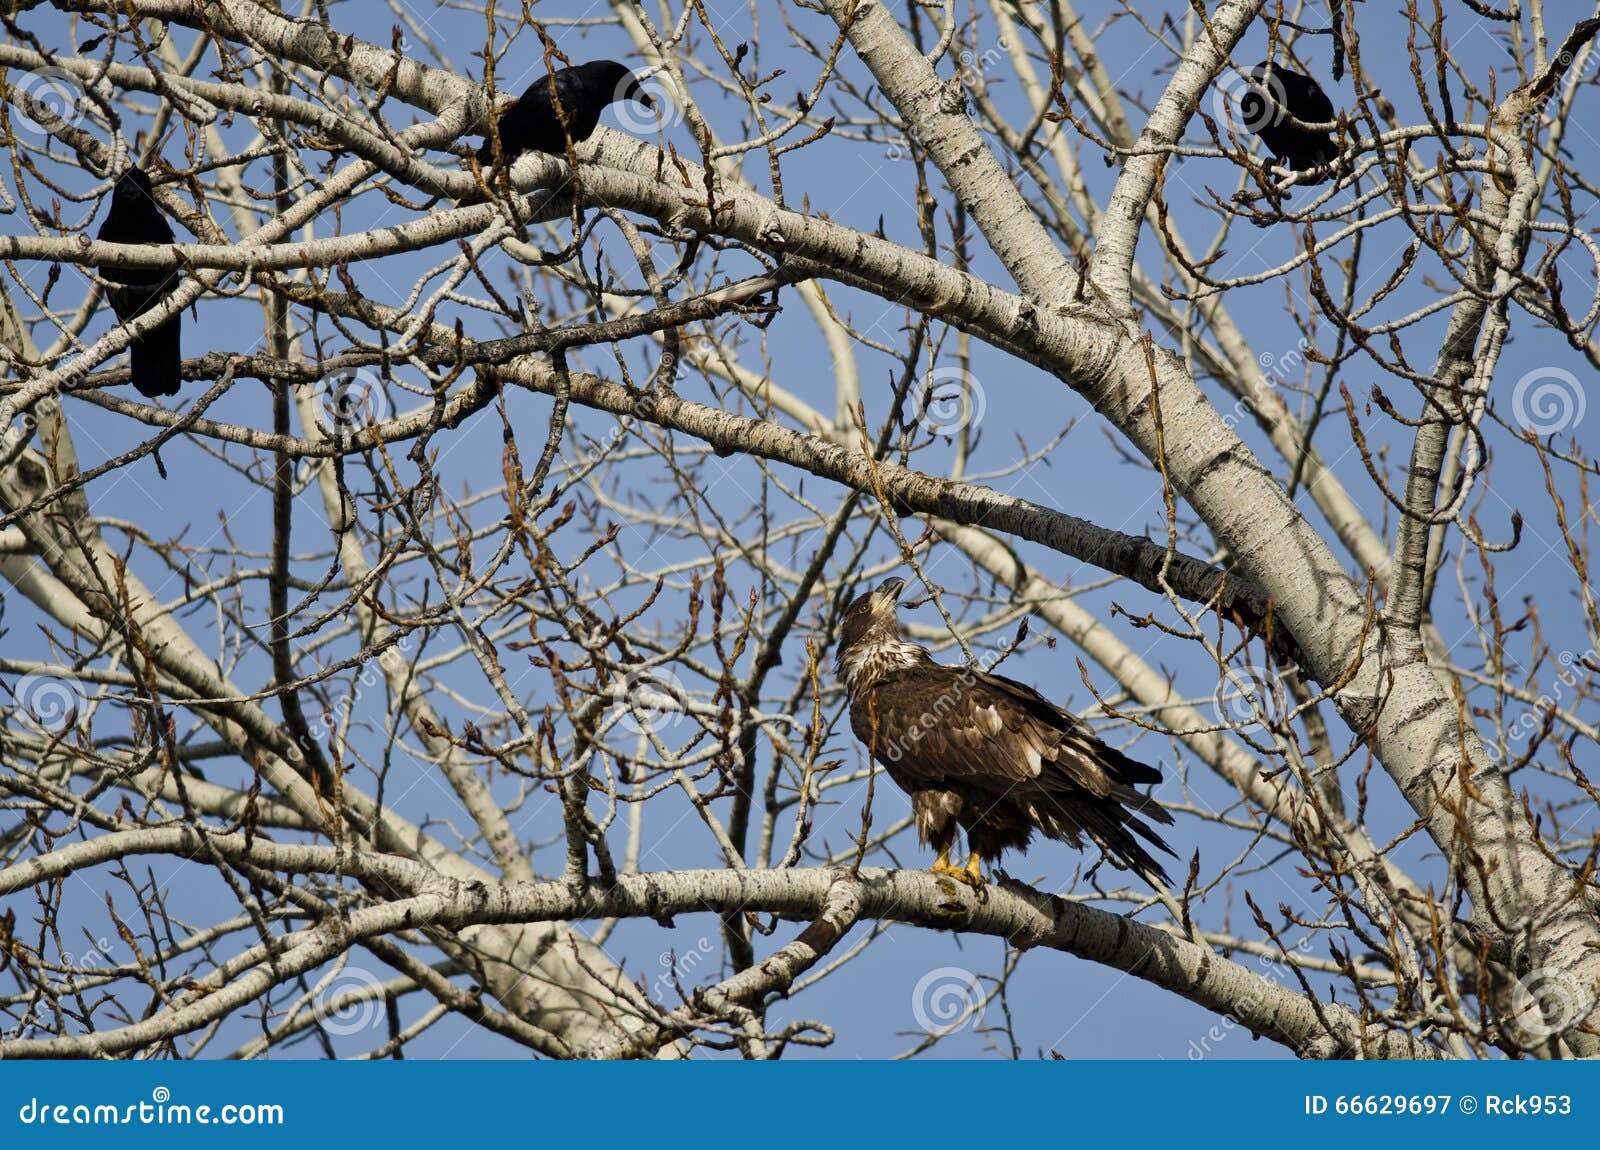 young bald eagle being harassed by american crows